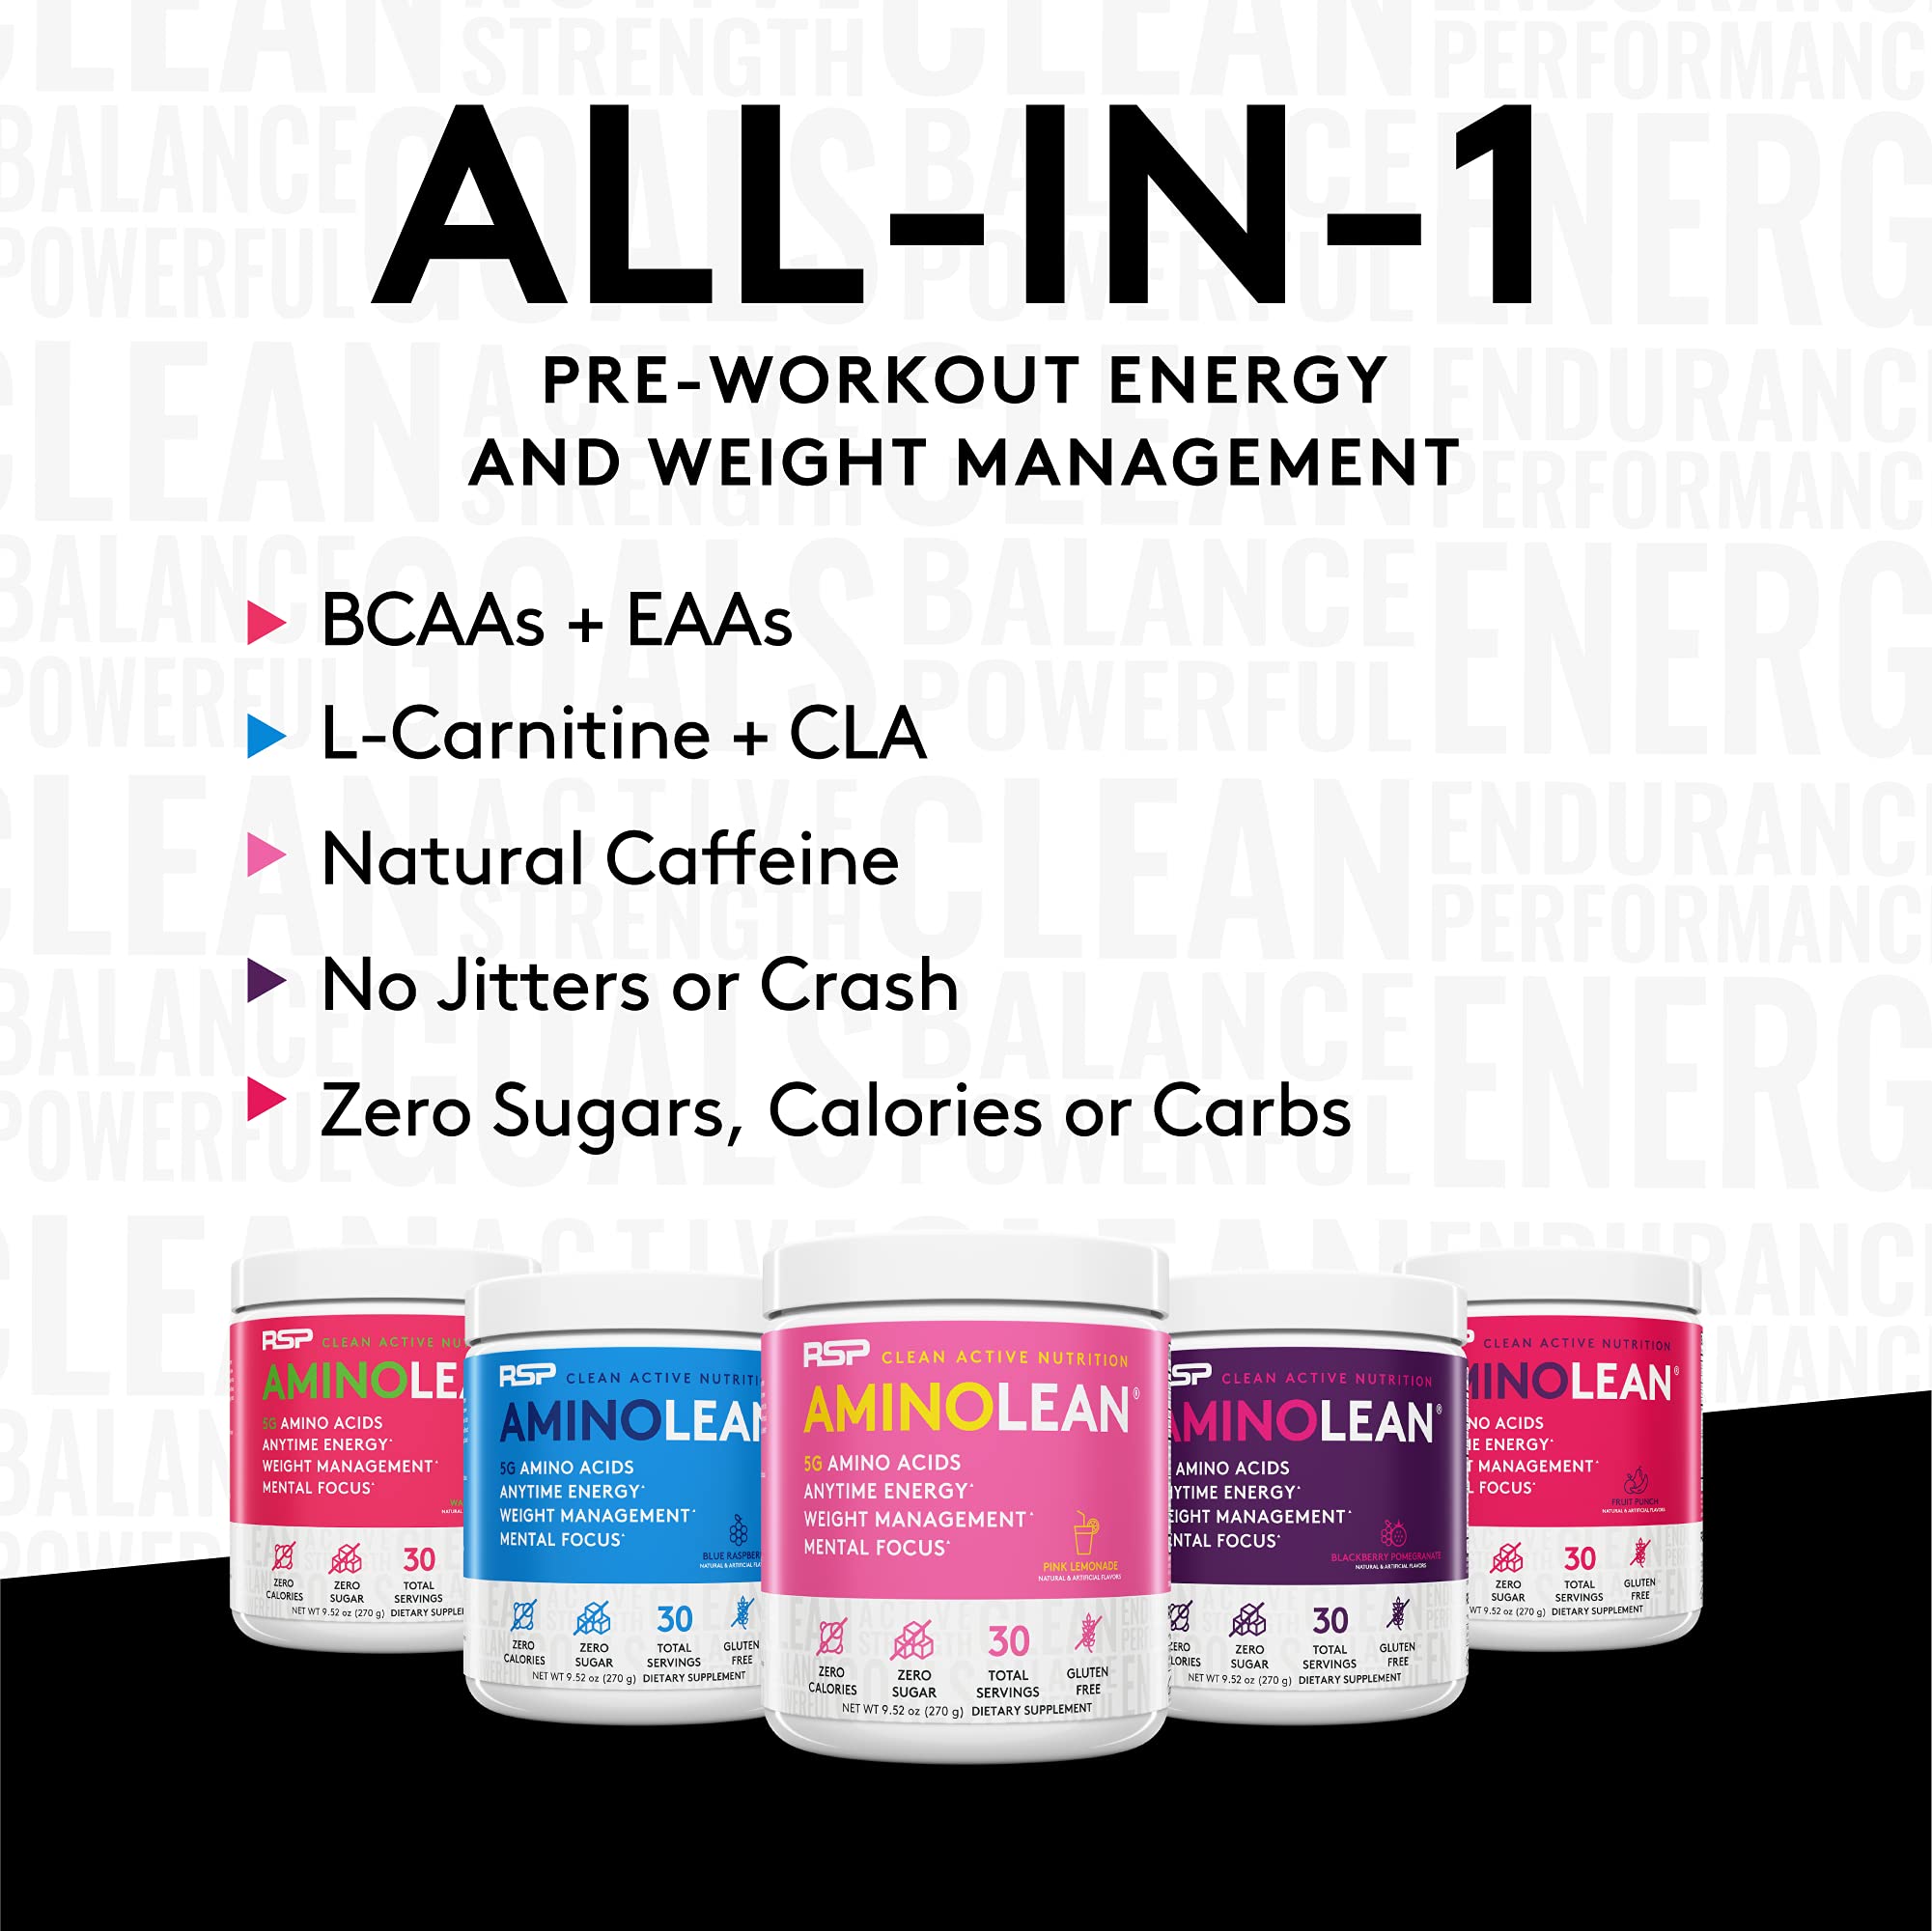 RSP NUTRITION AminoLean Pre Workout Powder, Amino Energy & Weight Management with BCAA Amino Acids & Natural Caffeine, Preworkout Boost for Men & Women, 30 Serv (Pack of 2)